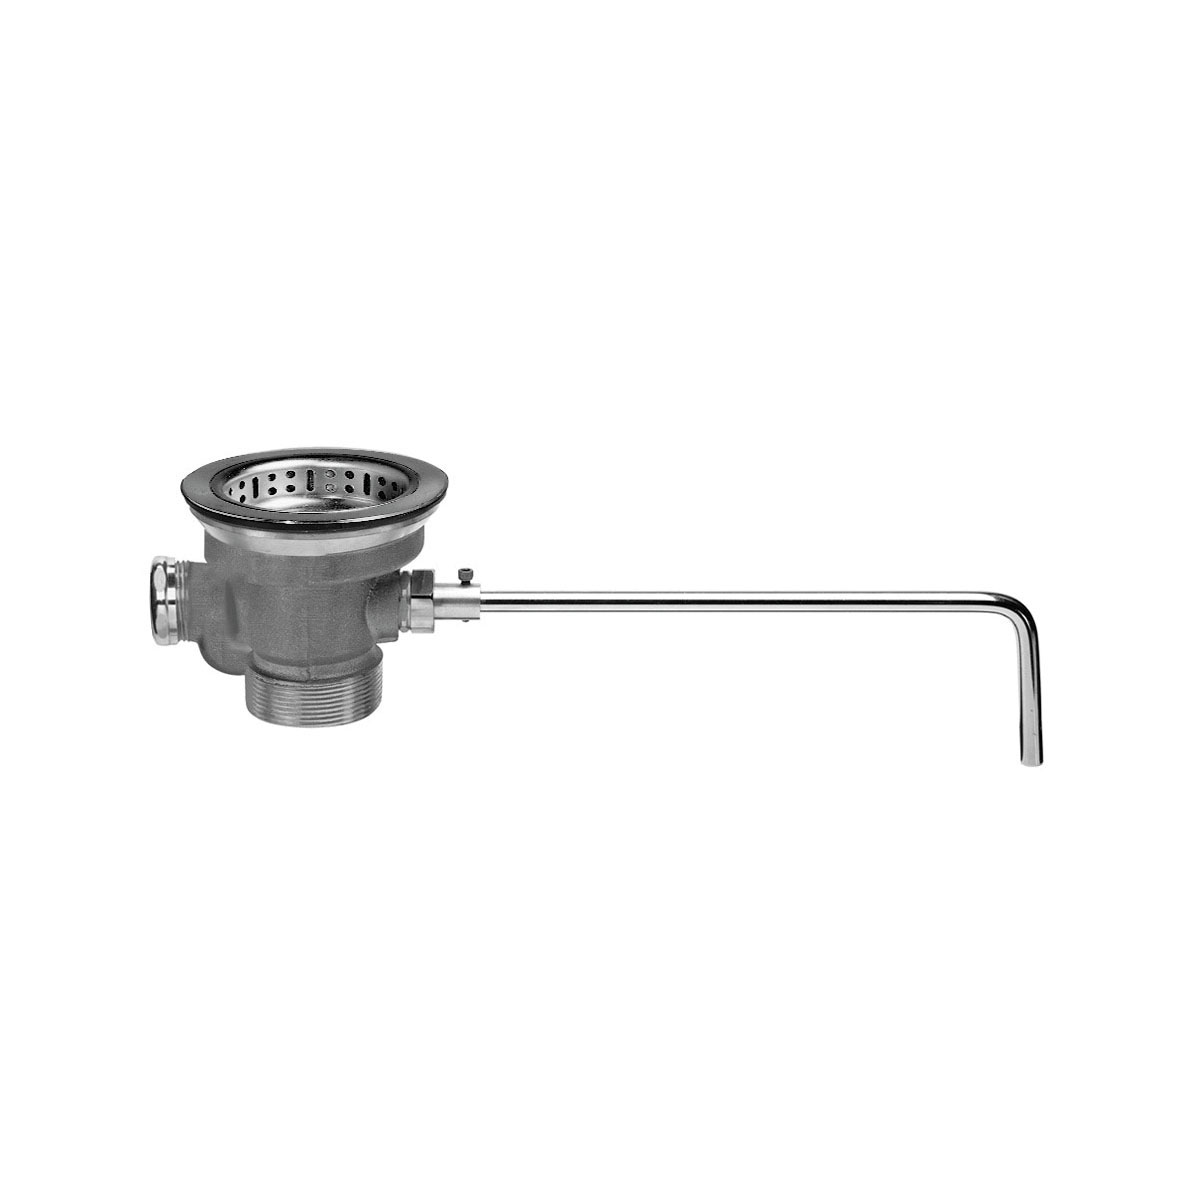 Fisher DrainKing™ 22411 Waste Valve With Port and Overflow Body, 1-1/2 x 2 in Nominal, Cast Red Brass Drain, Includes Lift Rod: No